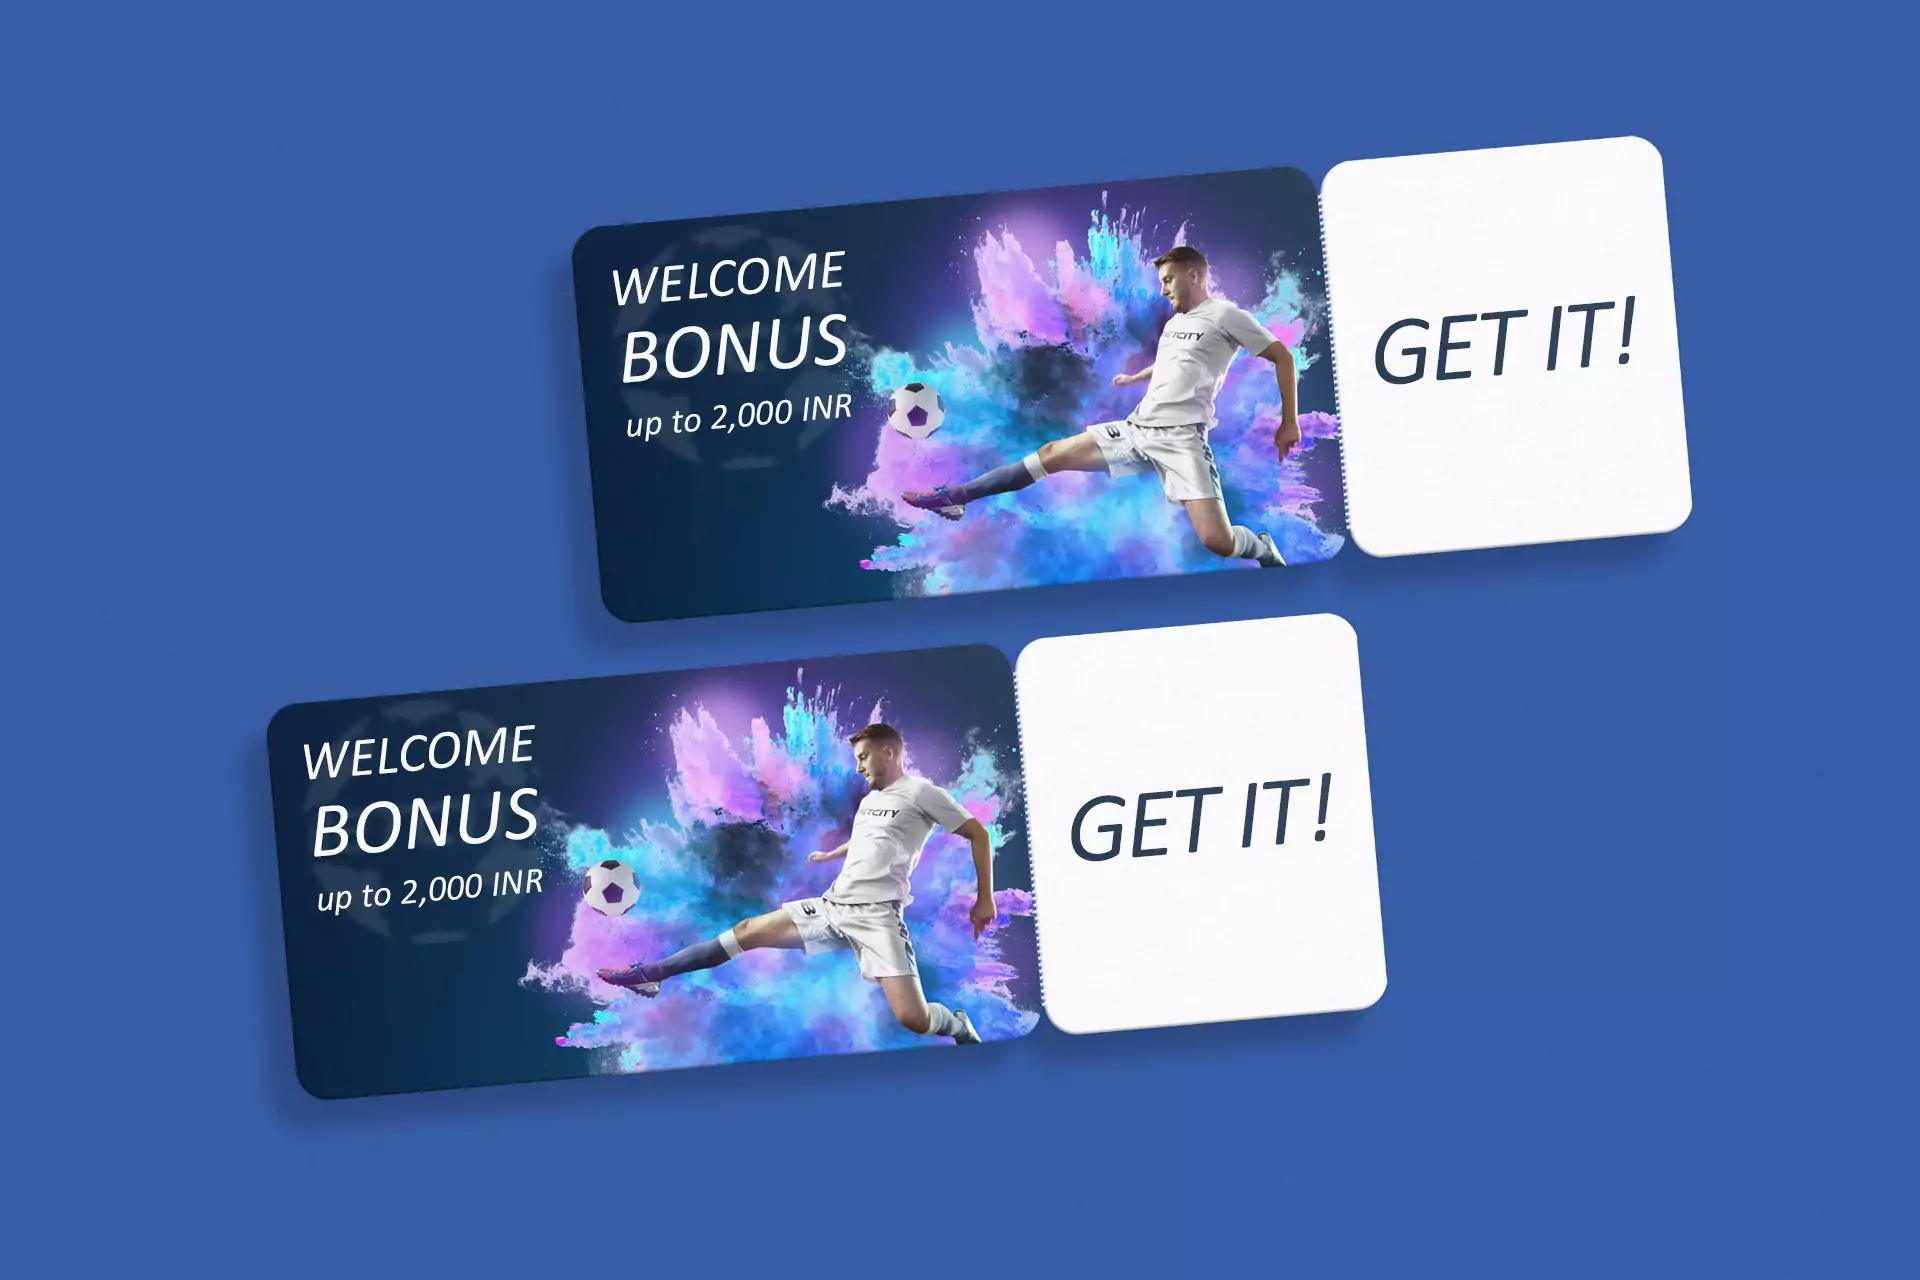 For new users, there is a welcome offer on the Betcity website and in the app.